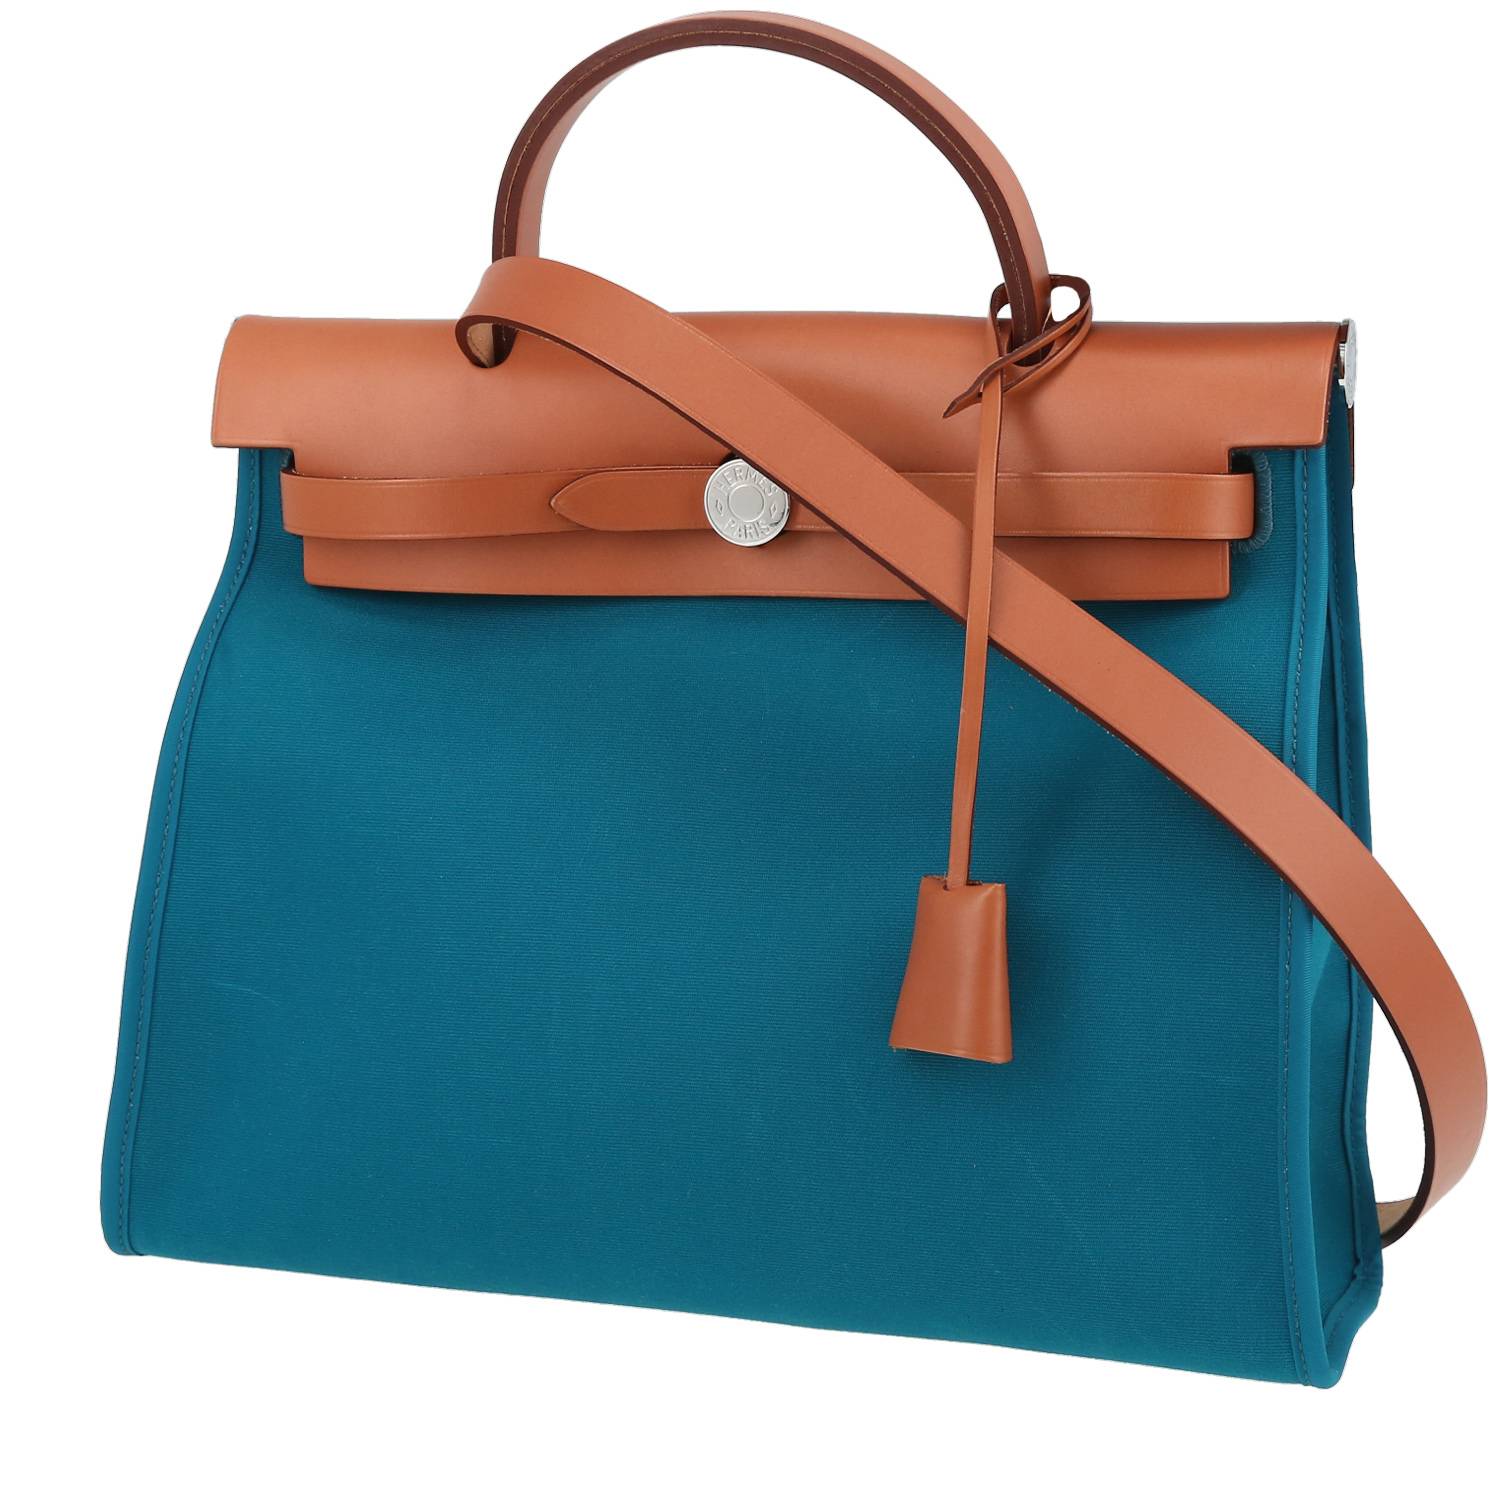 Herbag Handbag In Blue Canvas And Natural Cowhide